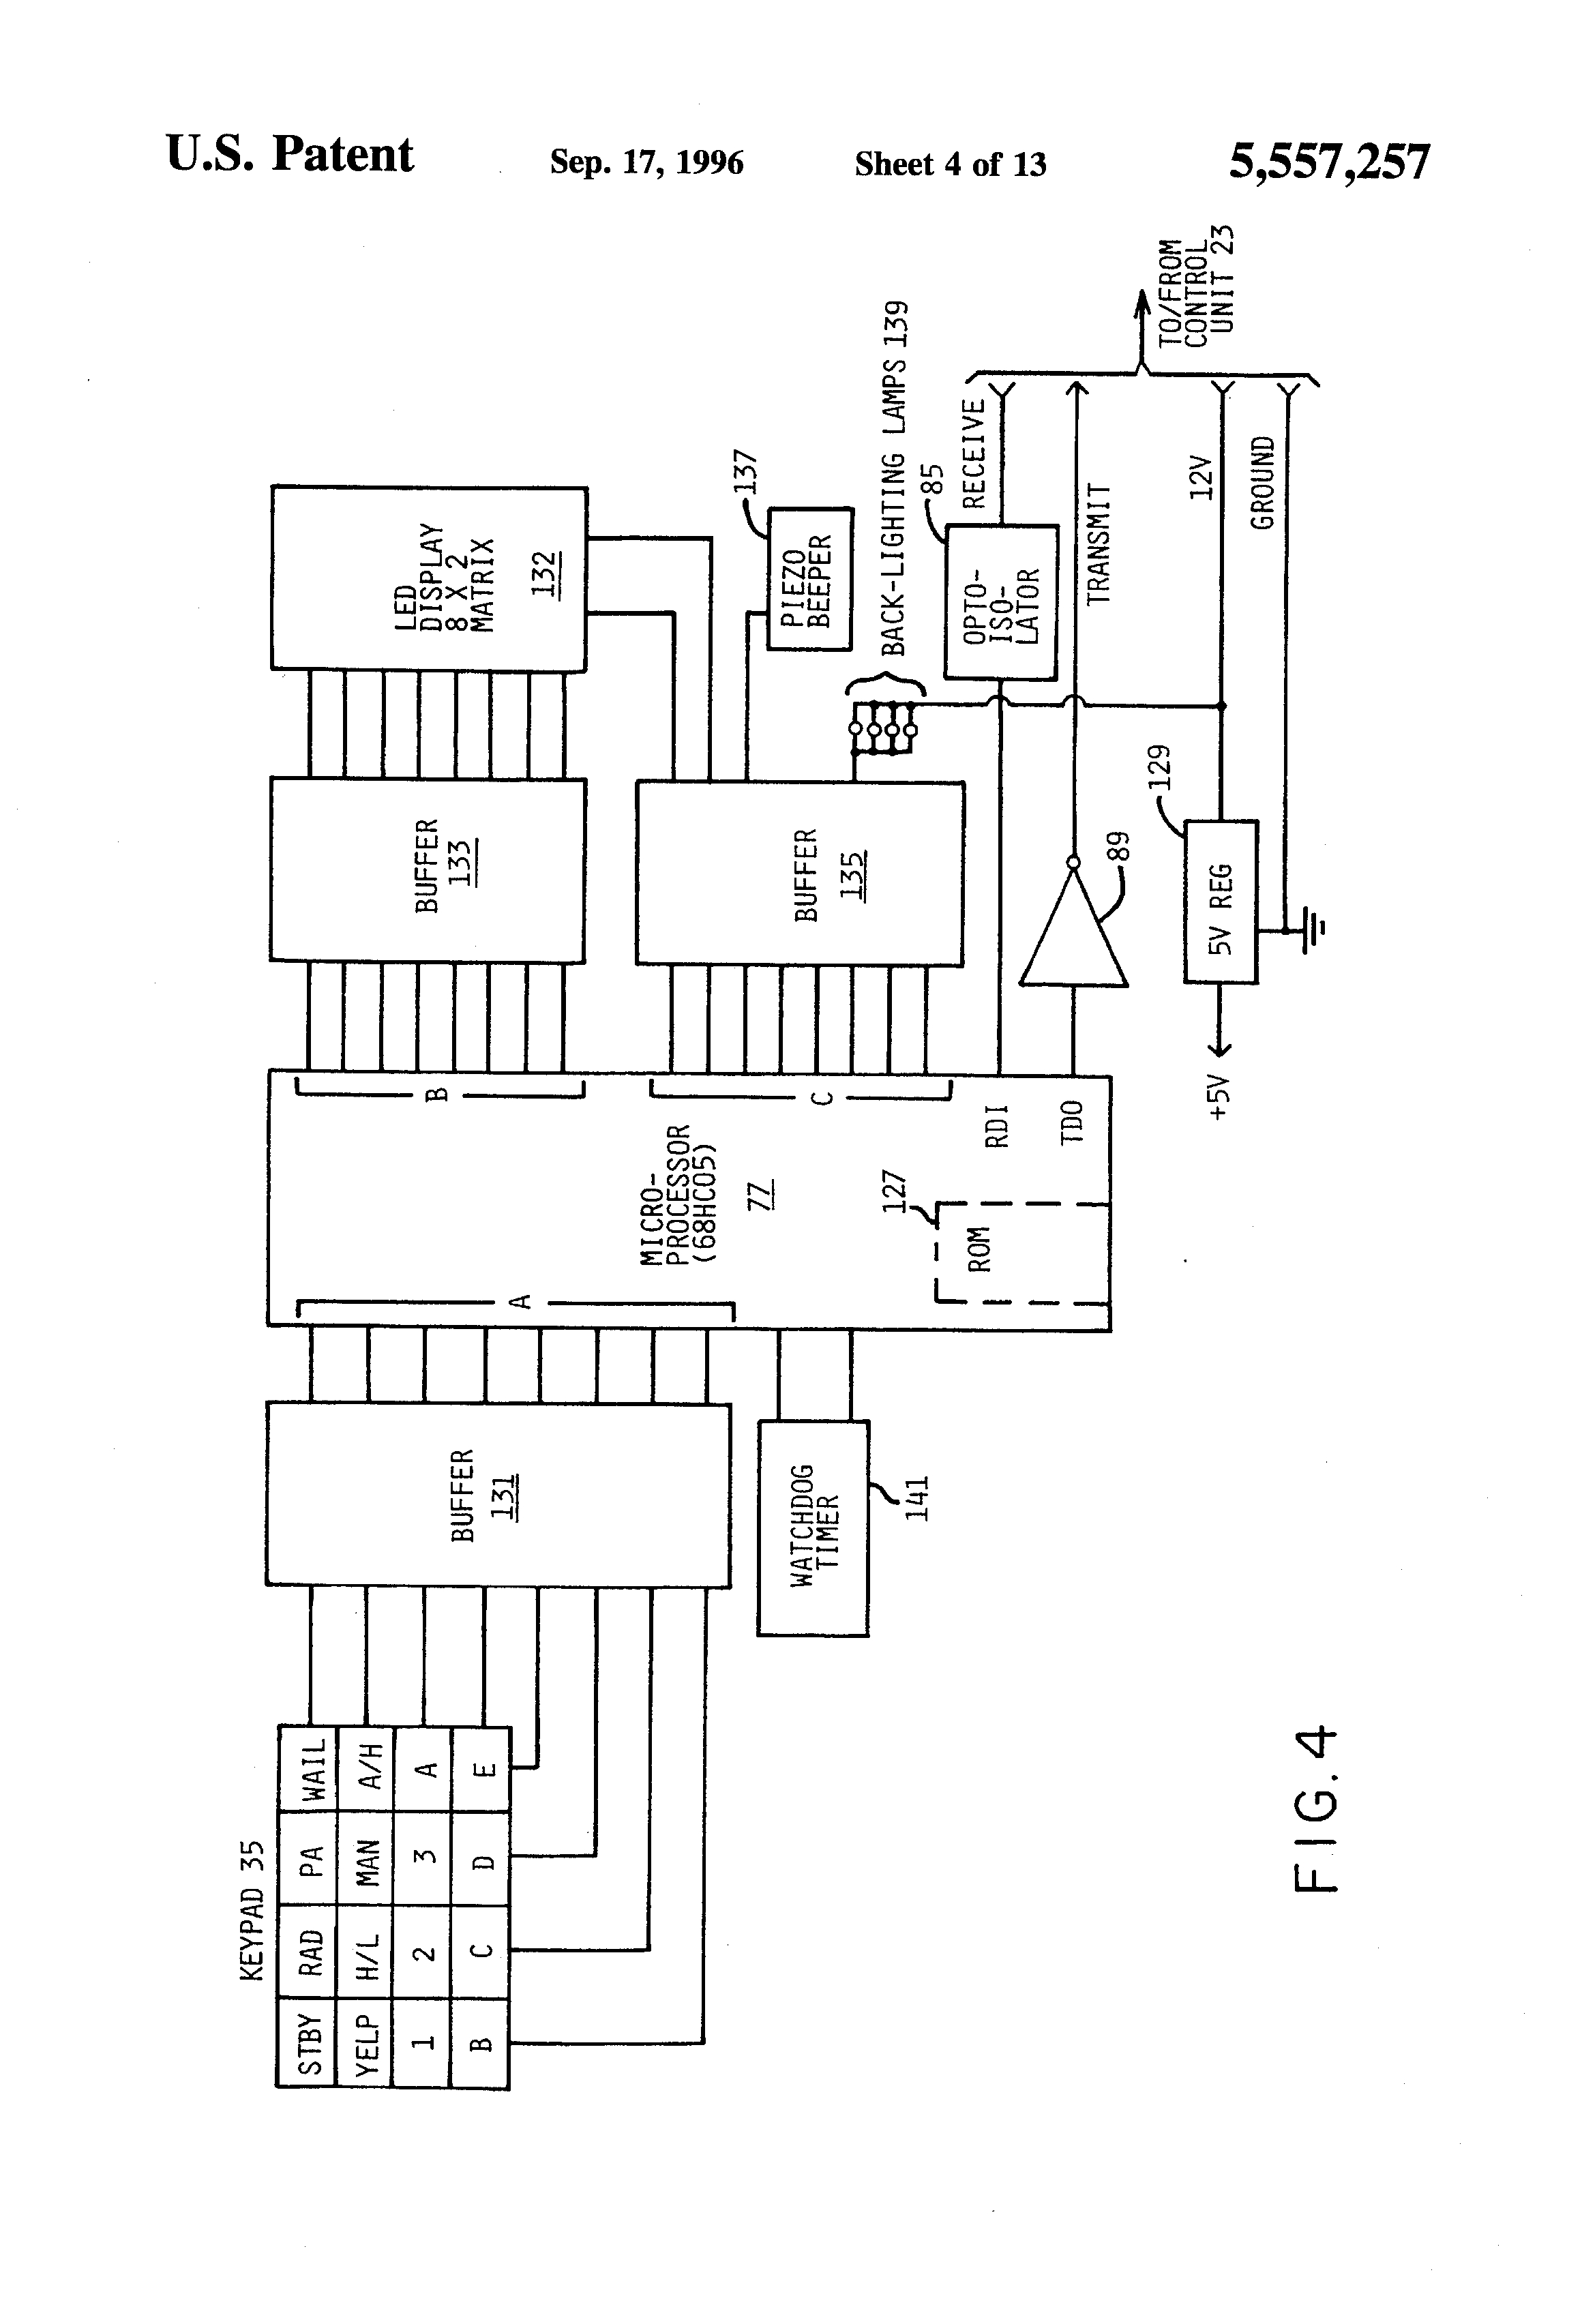 Signal Stat 900 Wiring Diagram To Lube New Federal Corporation Pa300 - Signal Stat 900 Wiring Diagram